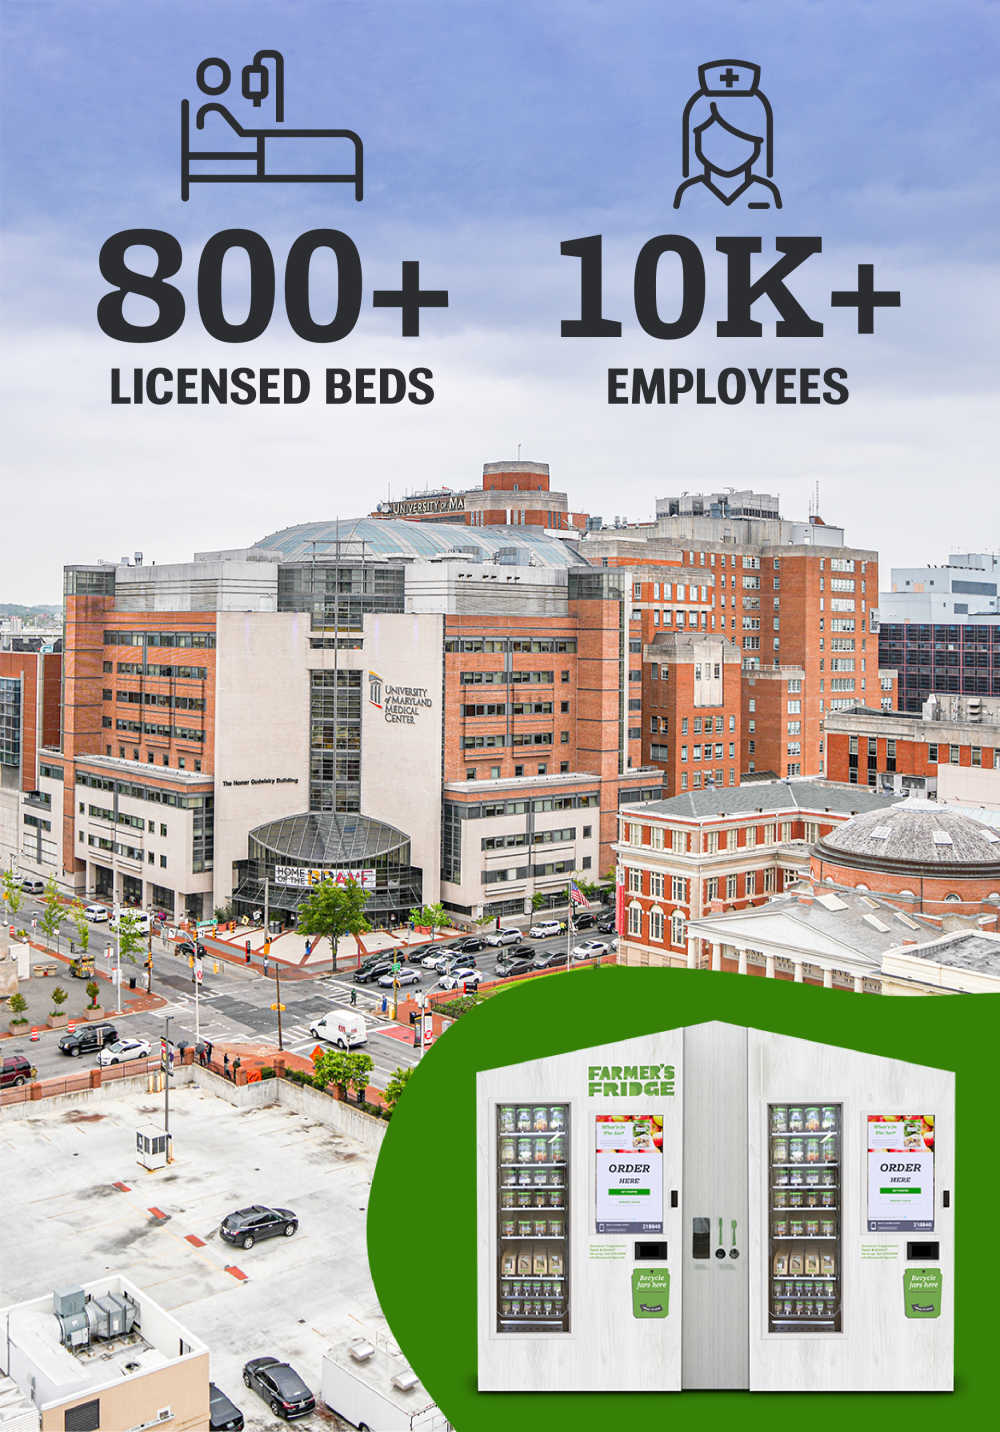 Image of the hospital with graphics outlining 800+ beds and 10,000 employees.